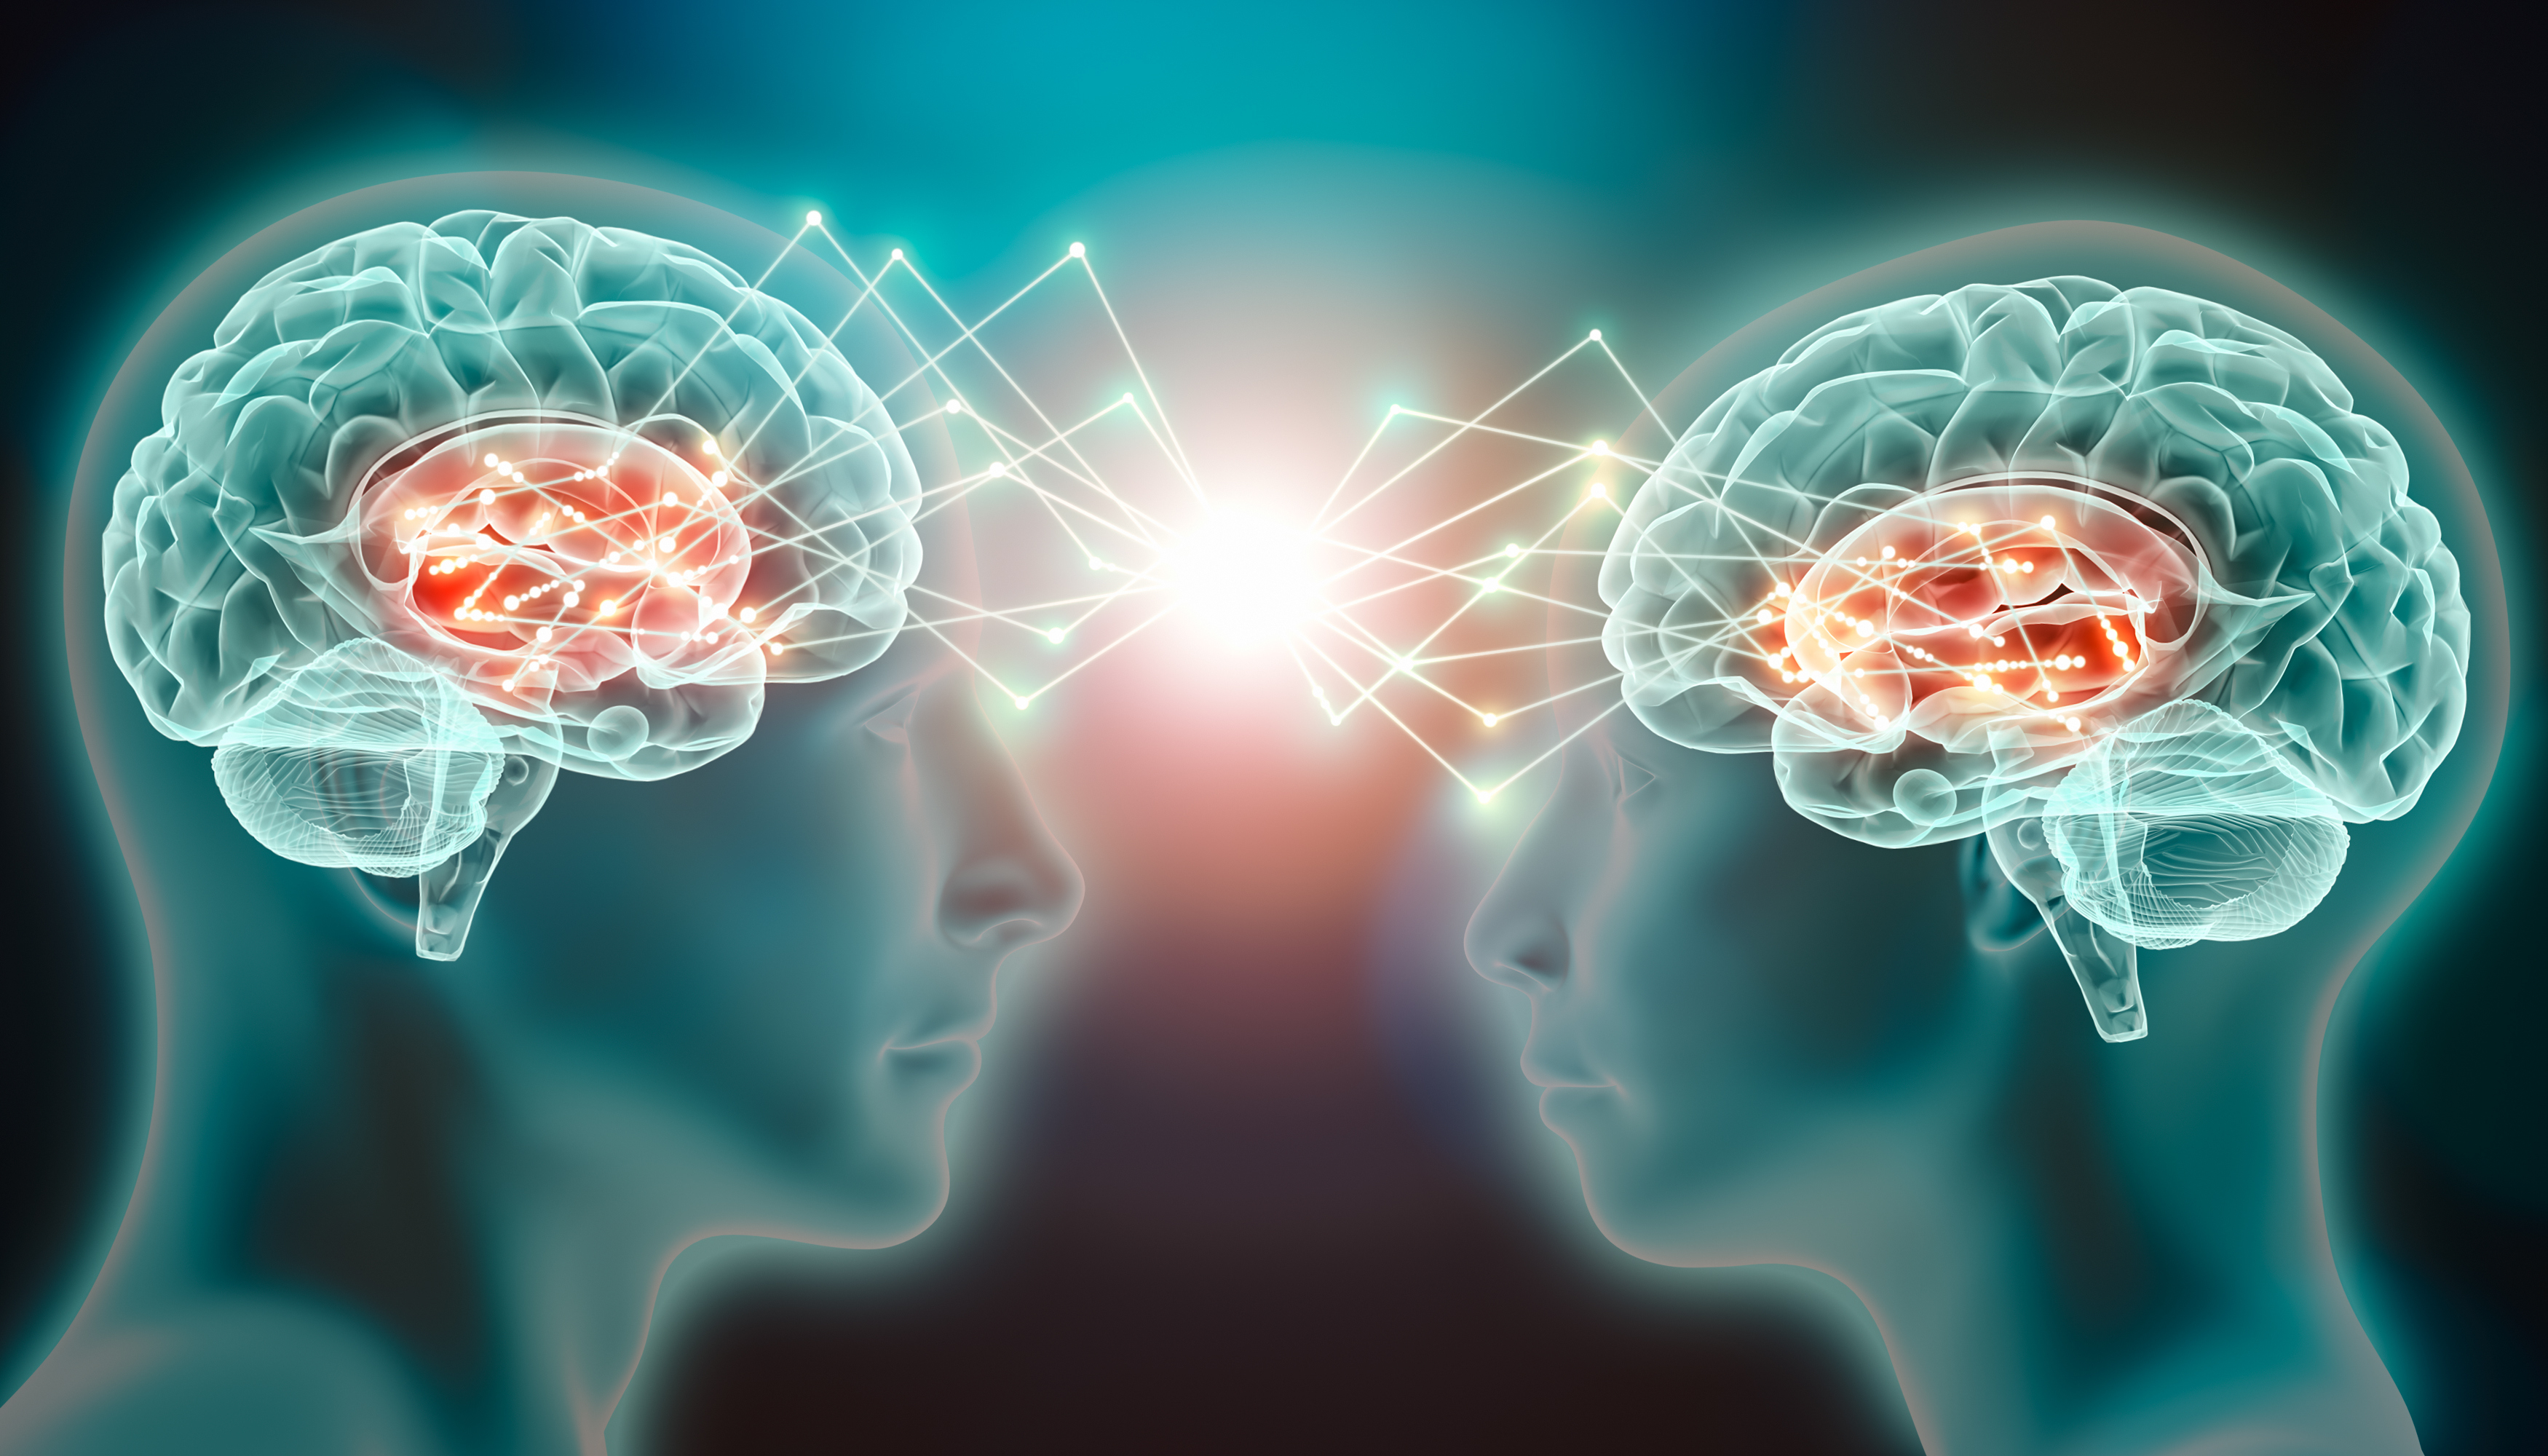 Two people facing each other with beams of light coming from their brains